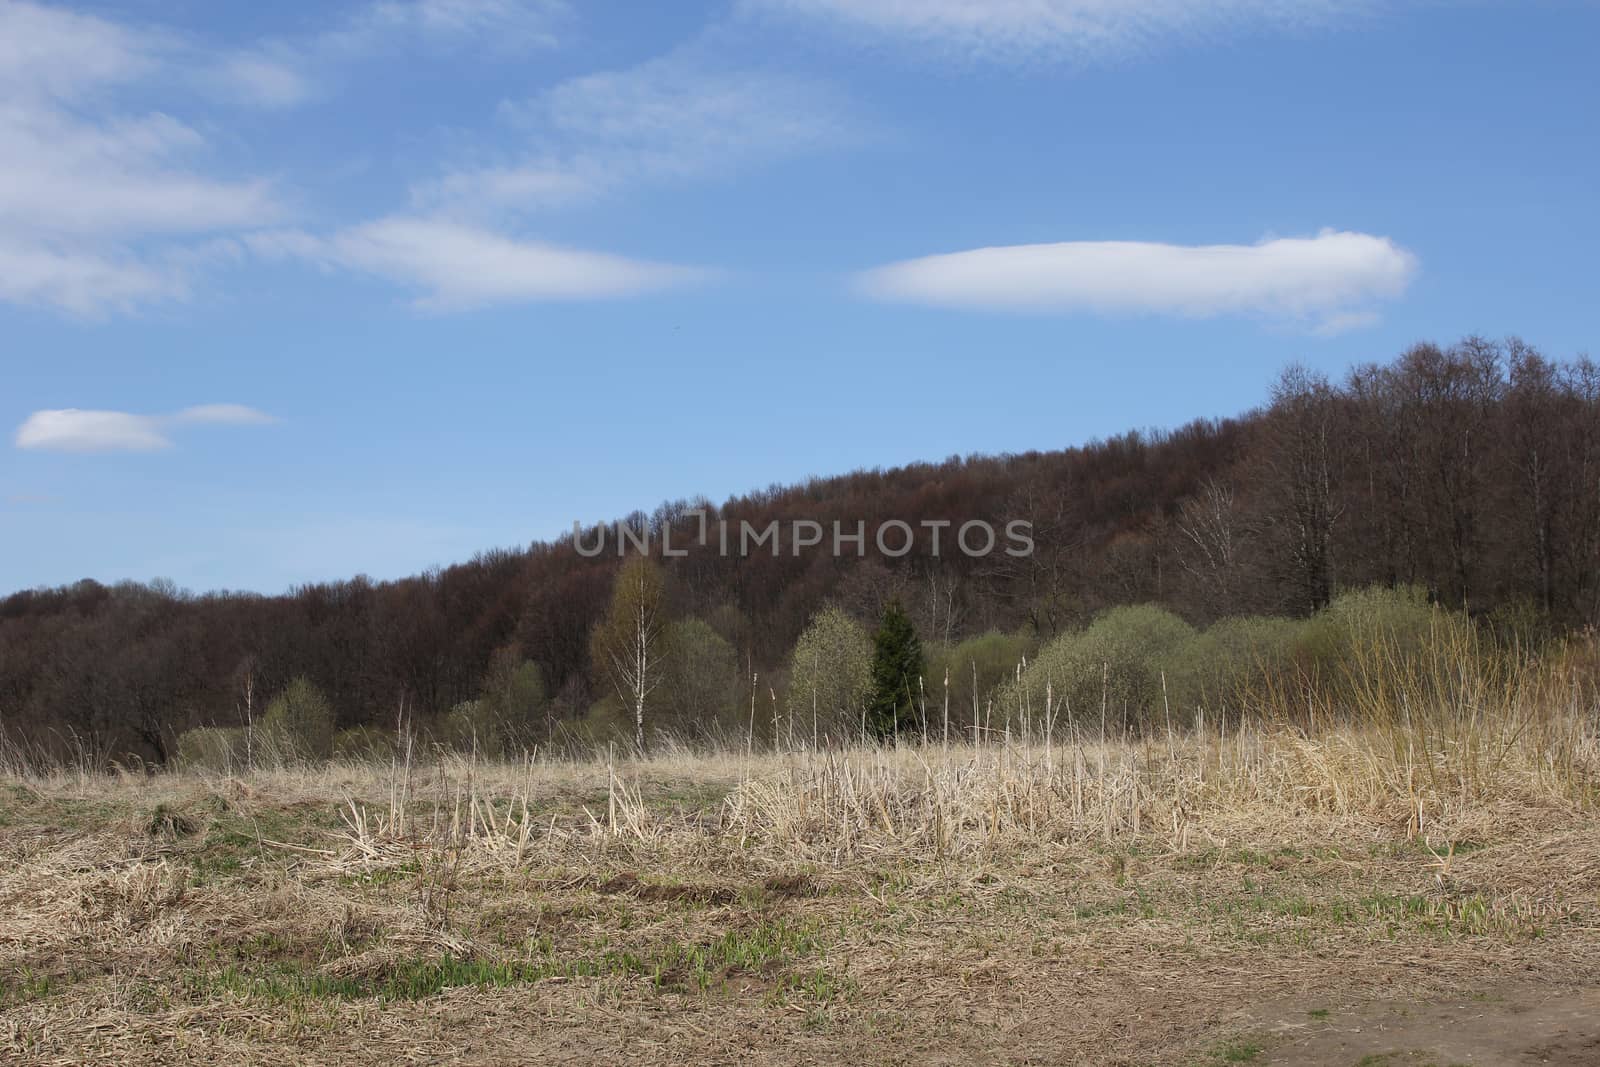 Mountains and field in the early spring on a blue sky background.